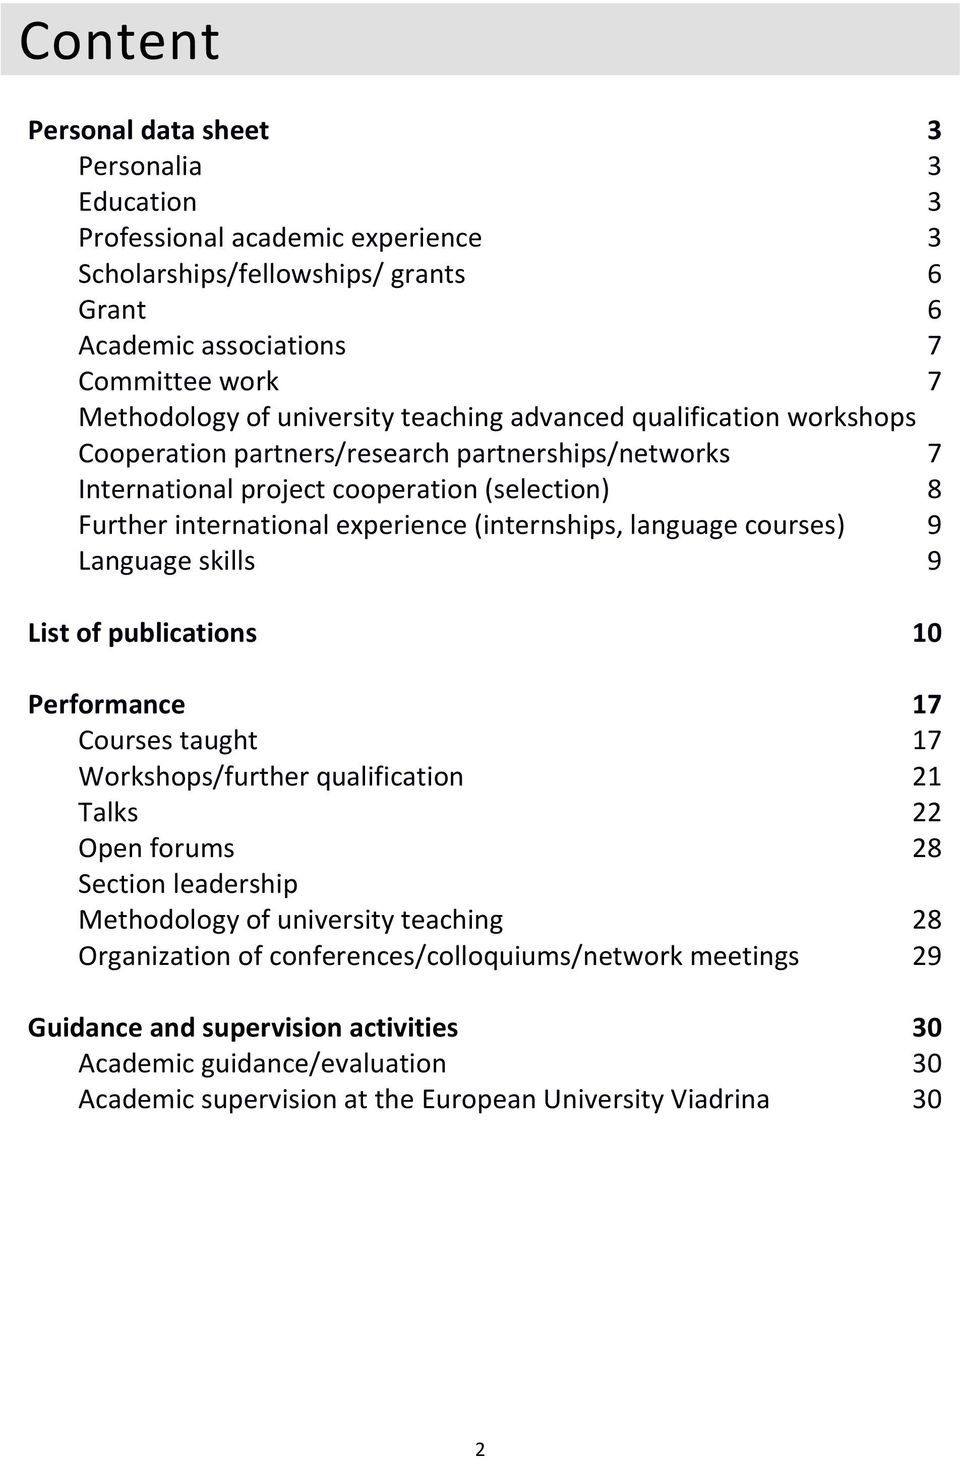 (internships, language courses) 9 Language skills 9 List of publications 10 Performance 17 Courses taught 17 Workshops/further qualification 21 Talks 22 Open forums 28 Section leadership Methodology